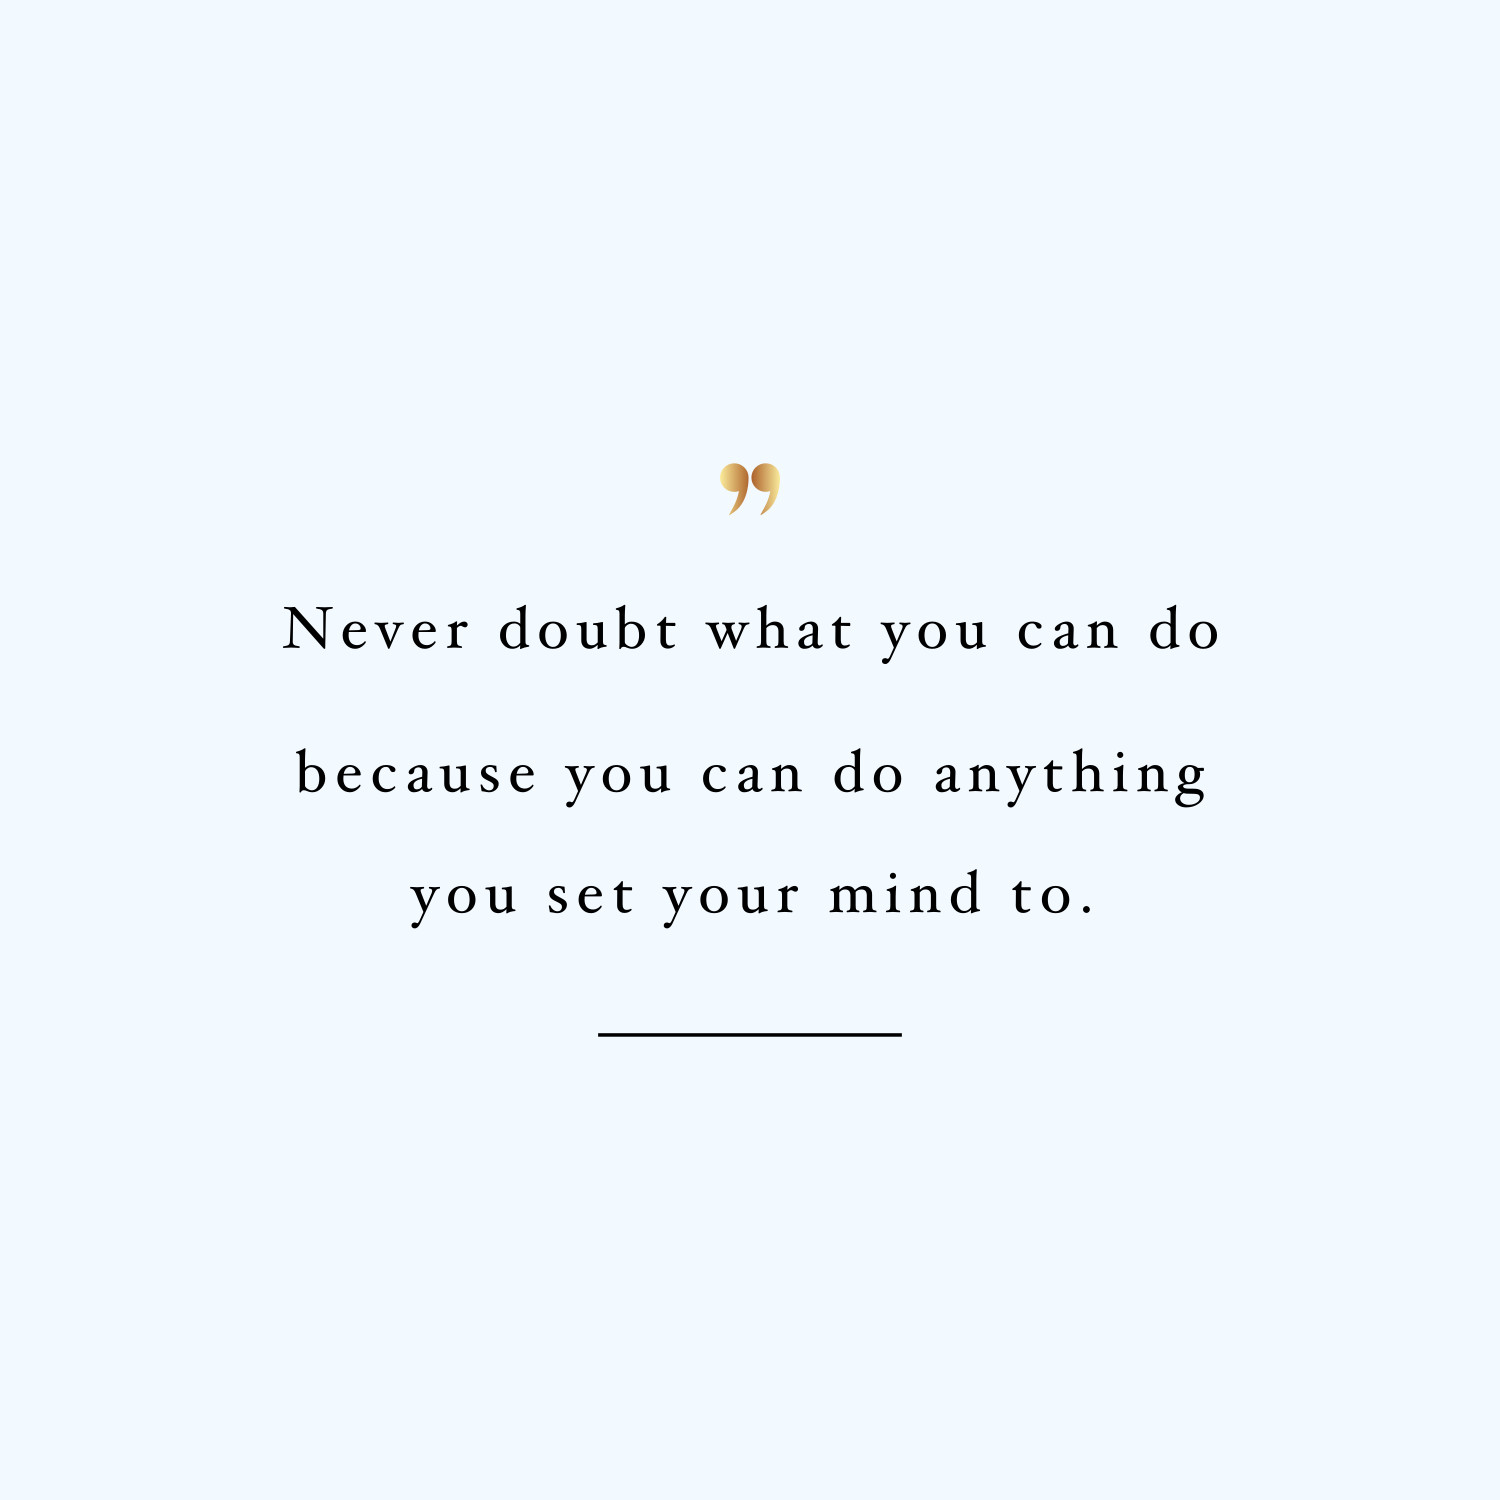 Never doubt what you can do! Browse our collection of inspirational wellness and fitness quotes and get instant training and weight loss motivation. Stay focused and get fit, healthy and happy! https://www.spotebi.com/workout-motivation/never-doubt-what-you-can-do/